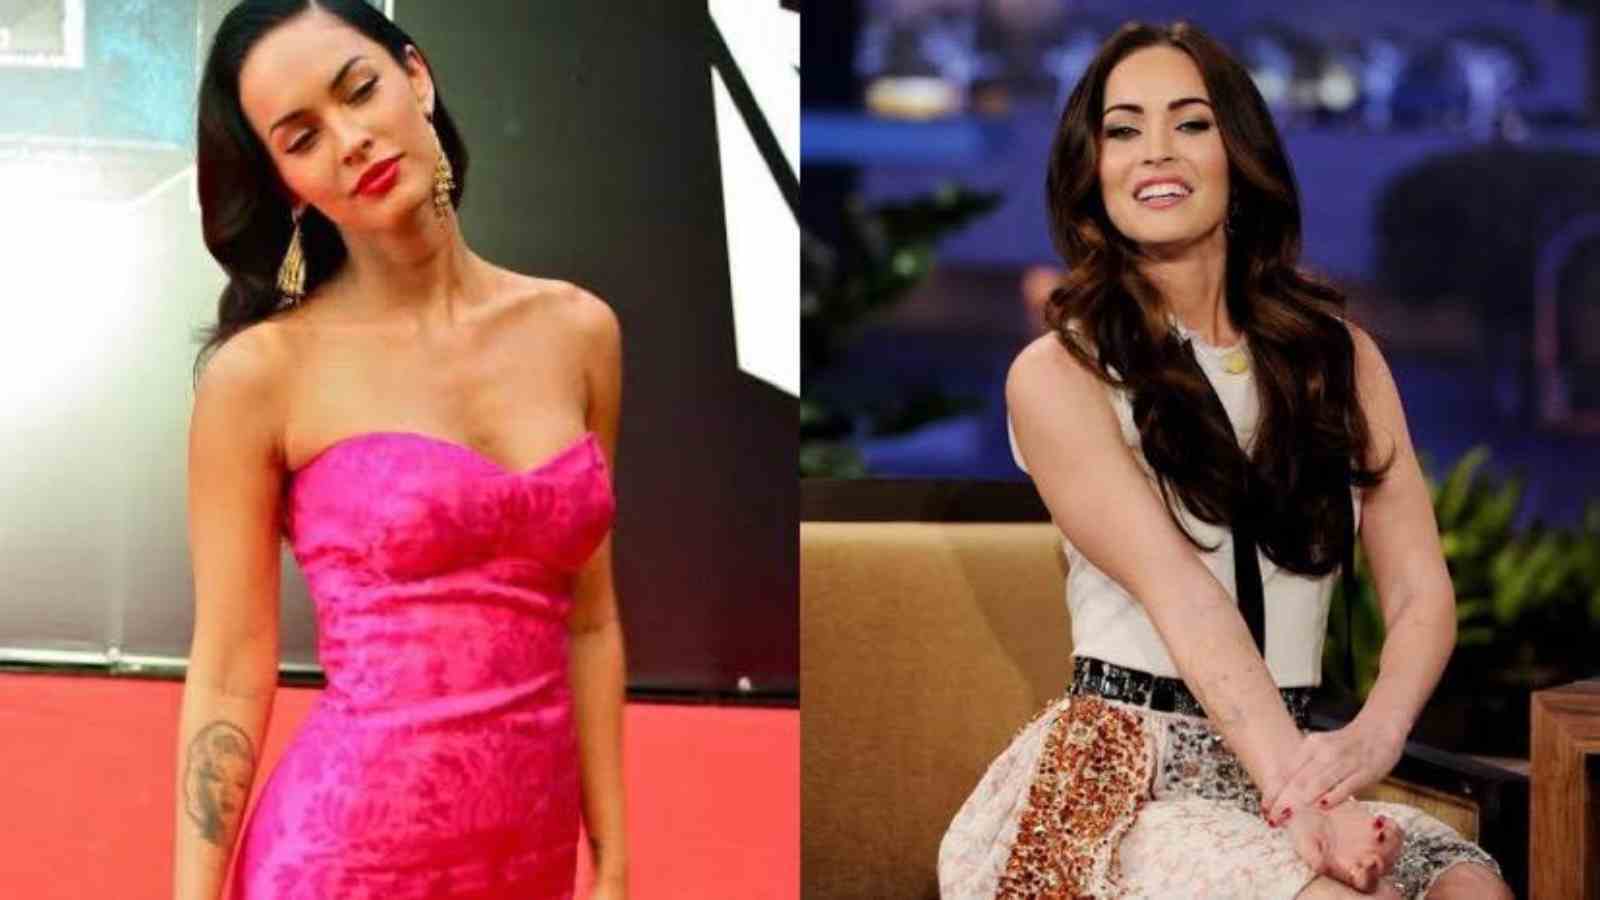 Here's why Megan Fox got her Marilyn Monroe tattoo removed